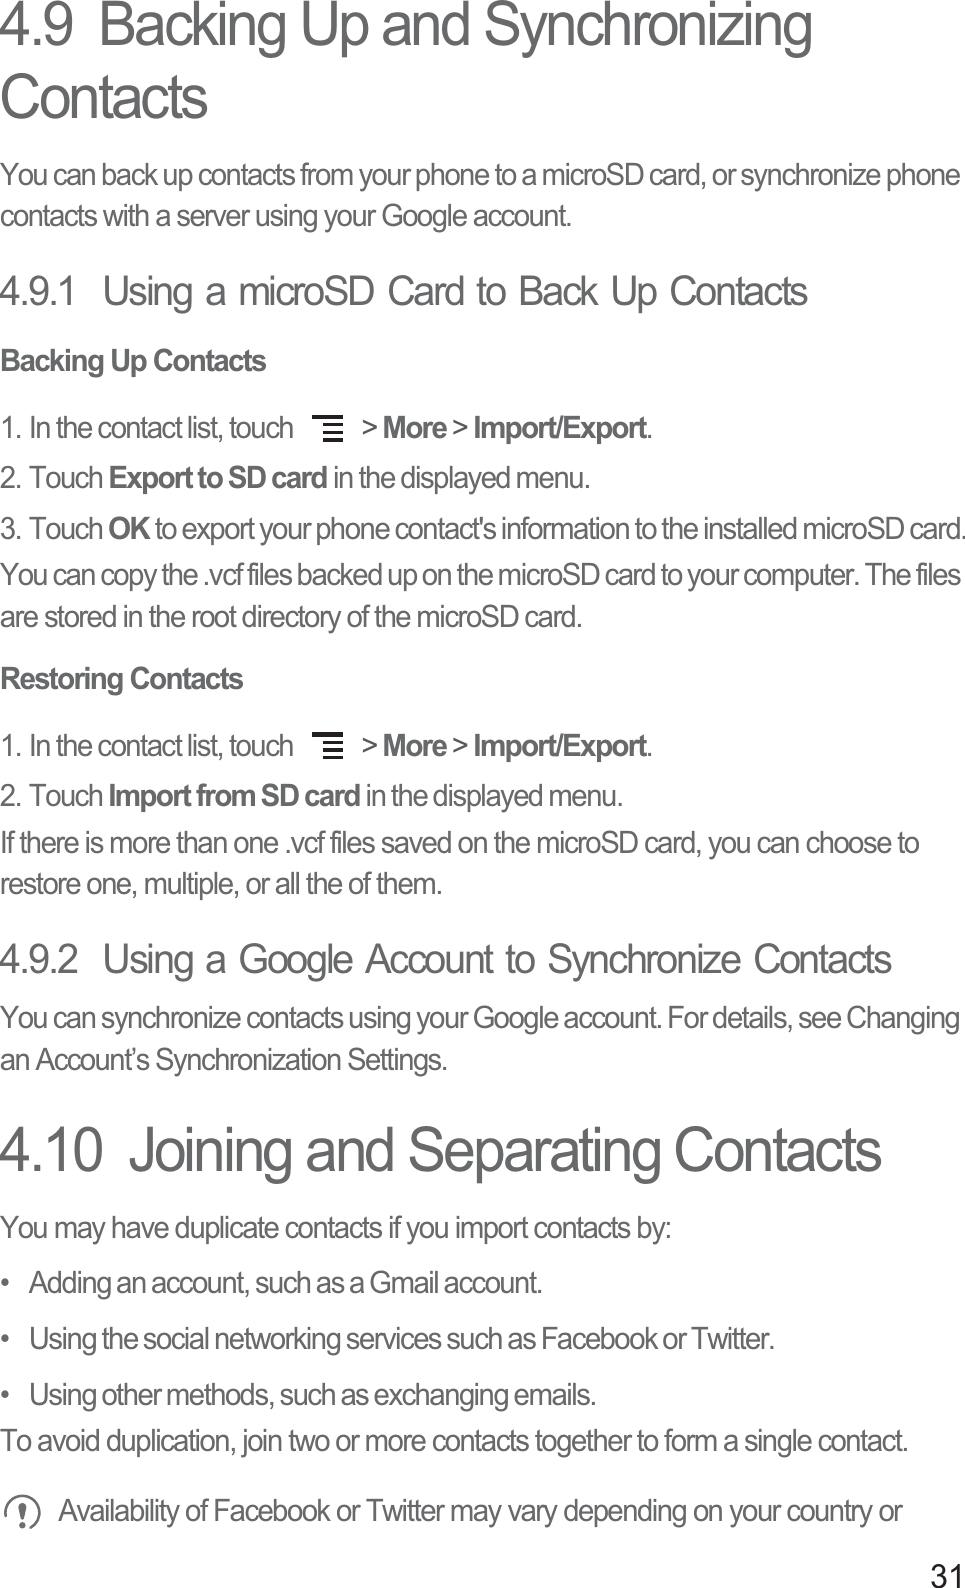 314.9  Backing Up and Synchronizing ContactsYou can back up contacts from your phone to a microSD card, or synchronize phone contacts with a server using your Google account.4.9.1  Using a microSD Card to Back Up ContactsBacking Up Contacts1. In the contact list, touch   &gt; More &gt; Import/Export.2. Touch Export to SD card in the displayed menu.3. Touch OK to export your phone contact&apos;s information to the installed microSD card.You can copy the .vcf files backed up on the microSD card to your computer. The files are stored in the root directory of the microSD card.Restoring Contacts1. In the contact list, touch   &gt; More &gt; Import/Export.2. Touch Import from SD card in the displayed menu.If there is more than one .vcf files saved on the microSD card, you can choose to restore one, multiple, or all the of them.4.9.2  Using a Google Account to Synchronize Contacts You can synchronize contacts using your Google account. For details, see Changing an Account’s Synchronization Settings.4.10  Joining and Separating ContactsYou may have duplicate contacts if you import contacts by:•   Adding an account, such as a Gmail account.•   Using the social networking services such as Facebook or Twitter. •   Using other methods, such as exchanging emails.To avoid duplication, join two or more contacts together to form a single contact.Availability of Facebook or Twitter may vary depending on your country or 